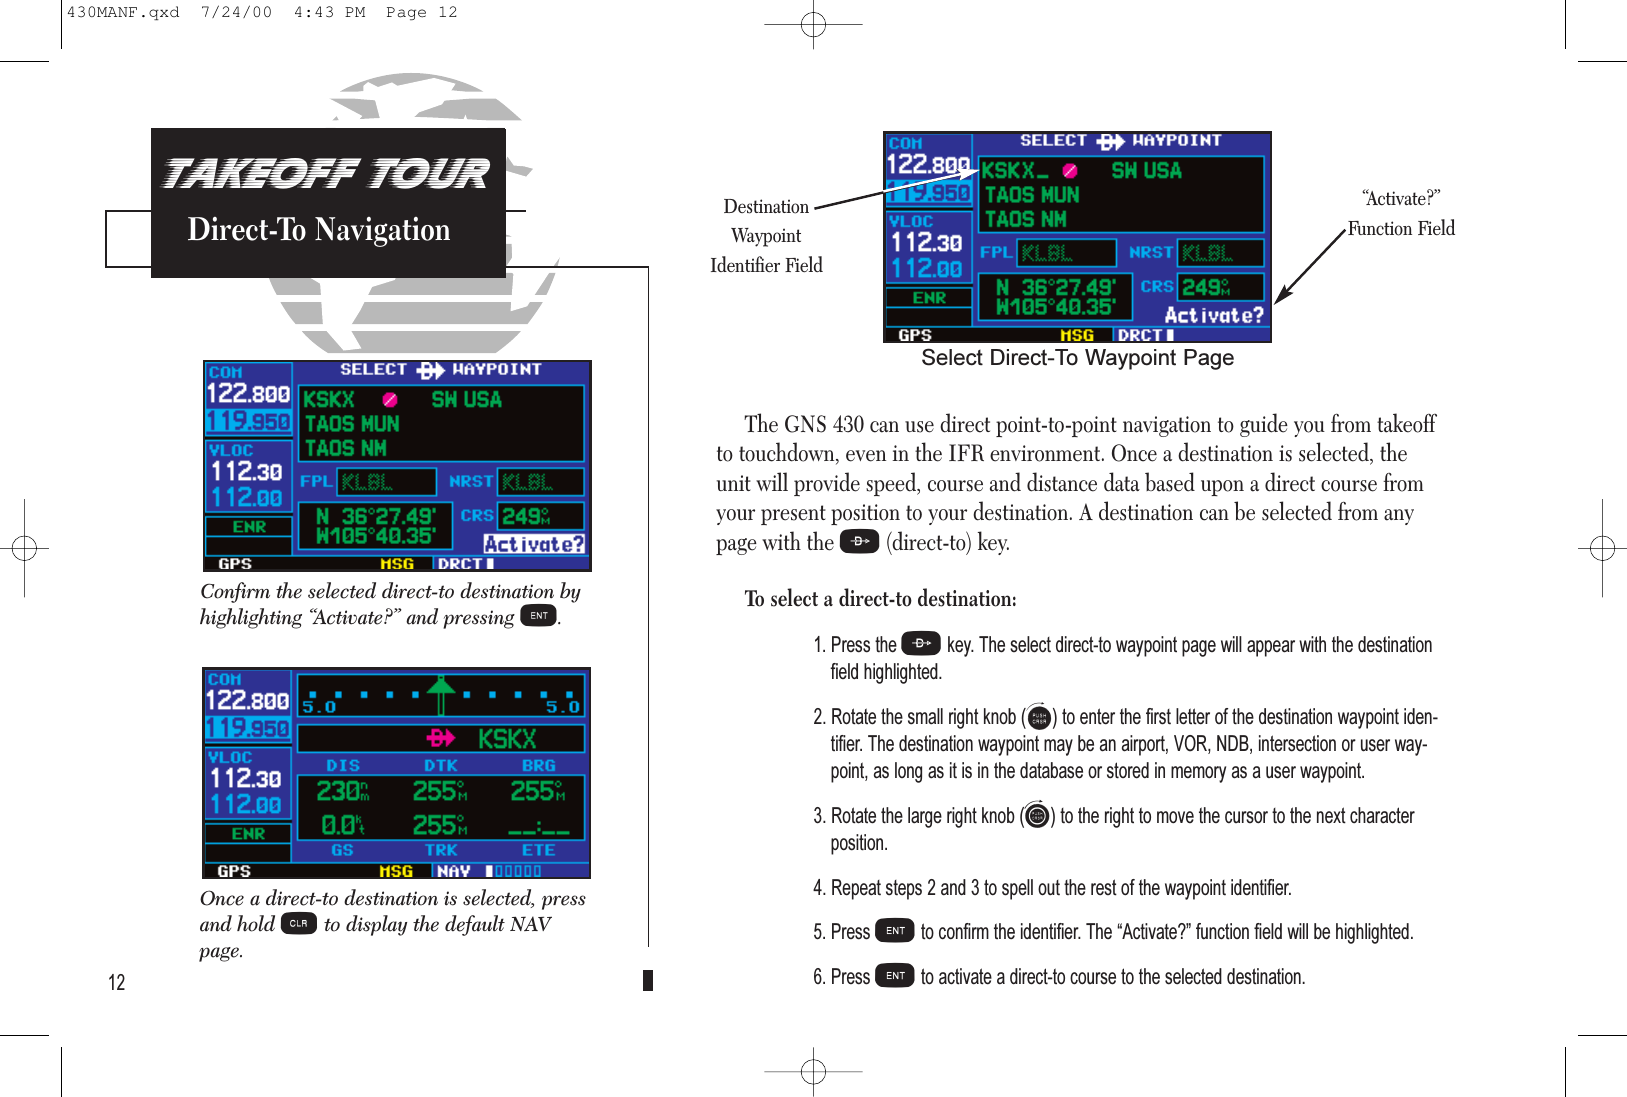 PROCEDURESApproach Examples5The GNS 430 can use direct point-to-point navigation to guide you from takeoffto touchdown, even in the IFR environment. Once a destination is selected, theunit will provide speed, course and distance data based upon a direct course fromyour present position to your destination. A destination can be selected from anypage with the D(direct-to) key.To select a direct-to destination:1. Press the Dkey. The select direct-to waypoint page will appear with the destinationfield highlighted.2. Rotate the small right knob (a) to enter the first letter of the destination waypoint iden-tifier. The destination waypoint may be an airport, VOR, NDB, intersection or user way-point, as long as it is in the database or stored in memory as a user waypoint.3. Rotate the large right knob (d) to the right to move the cursor to the next characterposition.4. Repeat steps 2 and 3 to spell out the rest of the waypoint identifier.5. Press Eto confirm the identifier. The Activate? function field will be highlighted.6. Press Eto activate a direct-to course to the selected destination.12Confirm the selected direct-to destination byhighlighting “Activate?” and pressing E.TAKEOFF TOURDirect-To Navigation“Activate?”Function FieldSelect Direct-To Waypoint PageDestinationWaypointIdentifier FieldOnce a direct-to destination is selected, pressand hold cto display the default NAVpage.430MANF.qxd  7/24/00  4:43 PM  Page 12